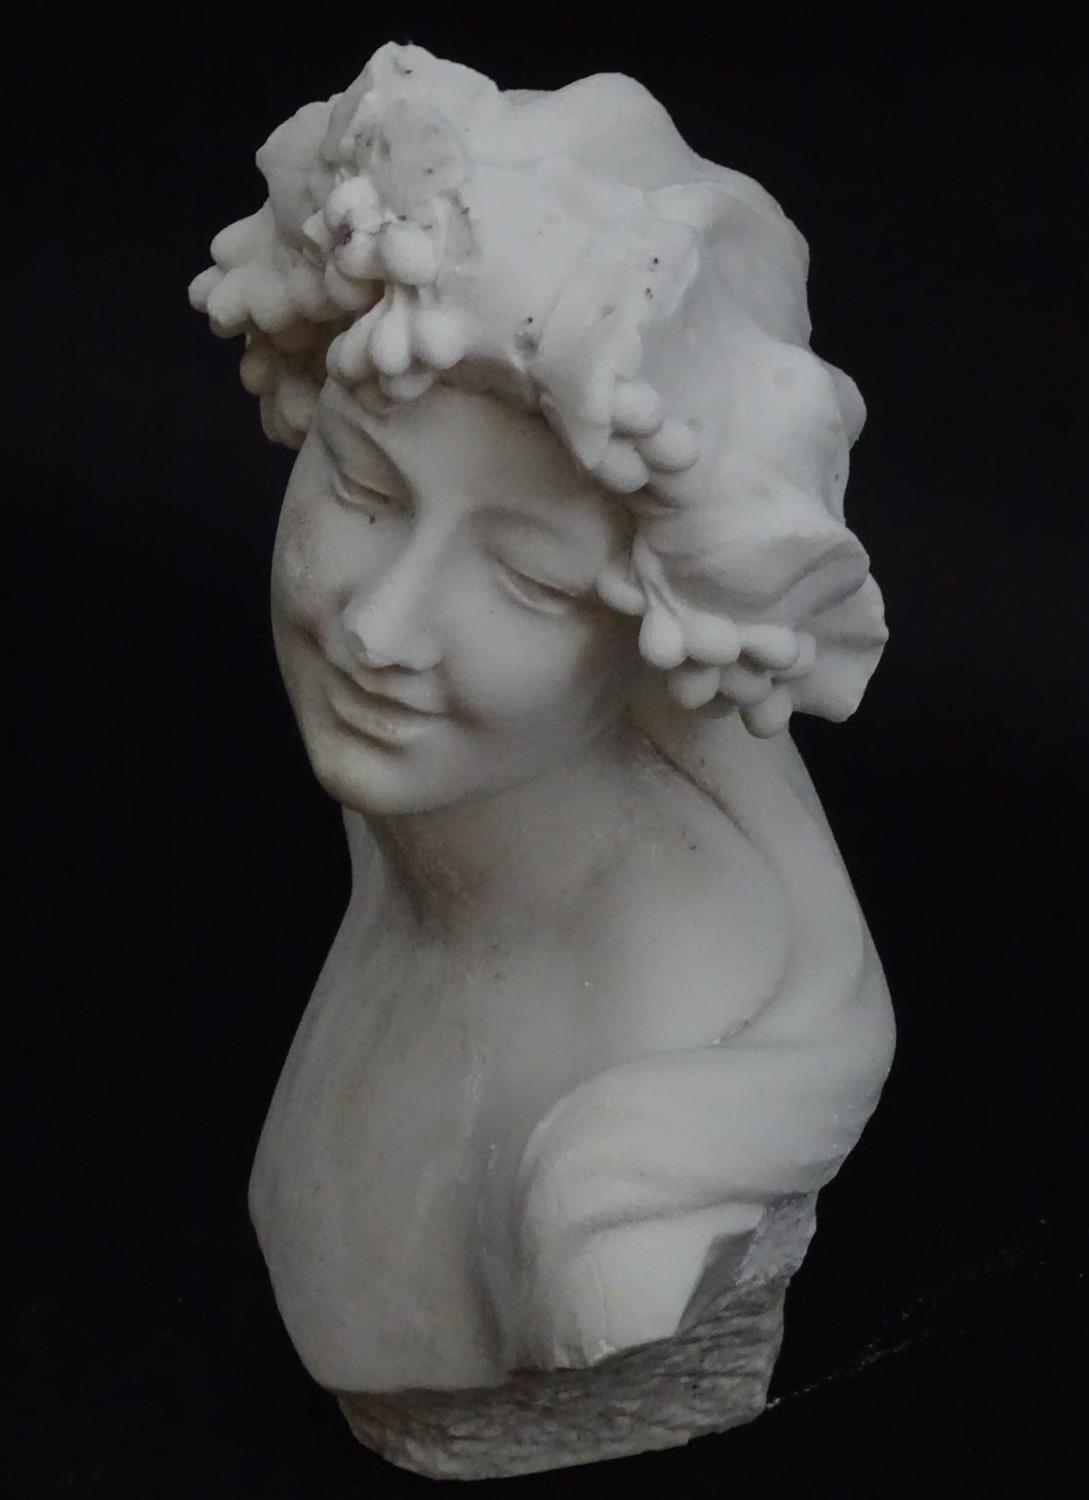 A reconstituted marble sculpture: bust of Bacchus, Roman God of Wine, Agriculture and fertility. - Image 6 of 18